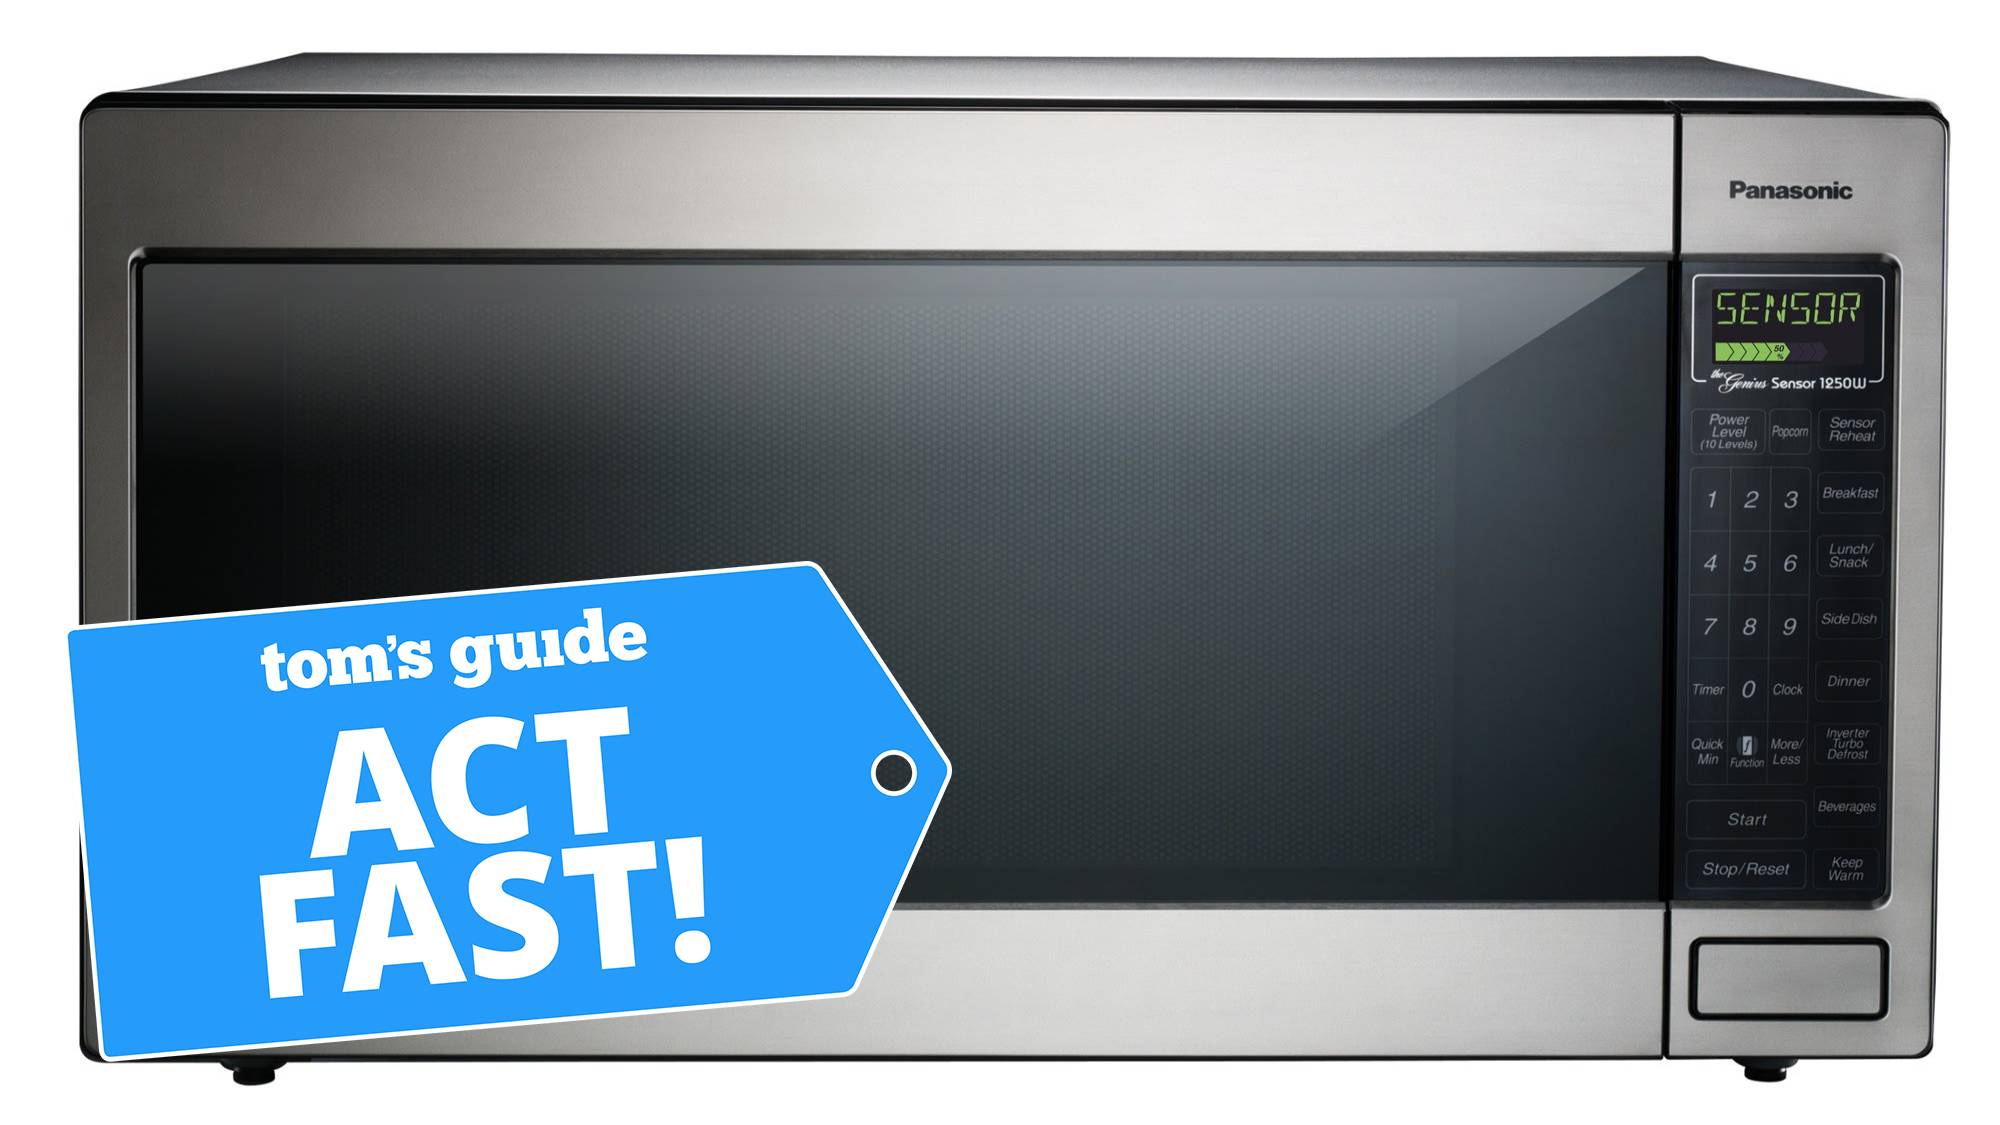 Panasonic microwave with a Tom's Guide deal tag